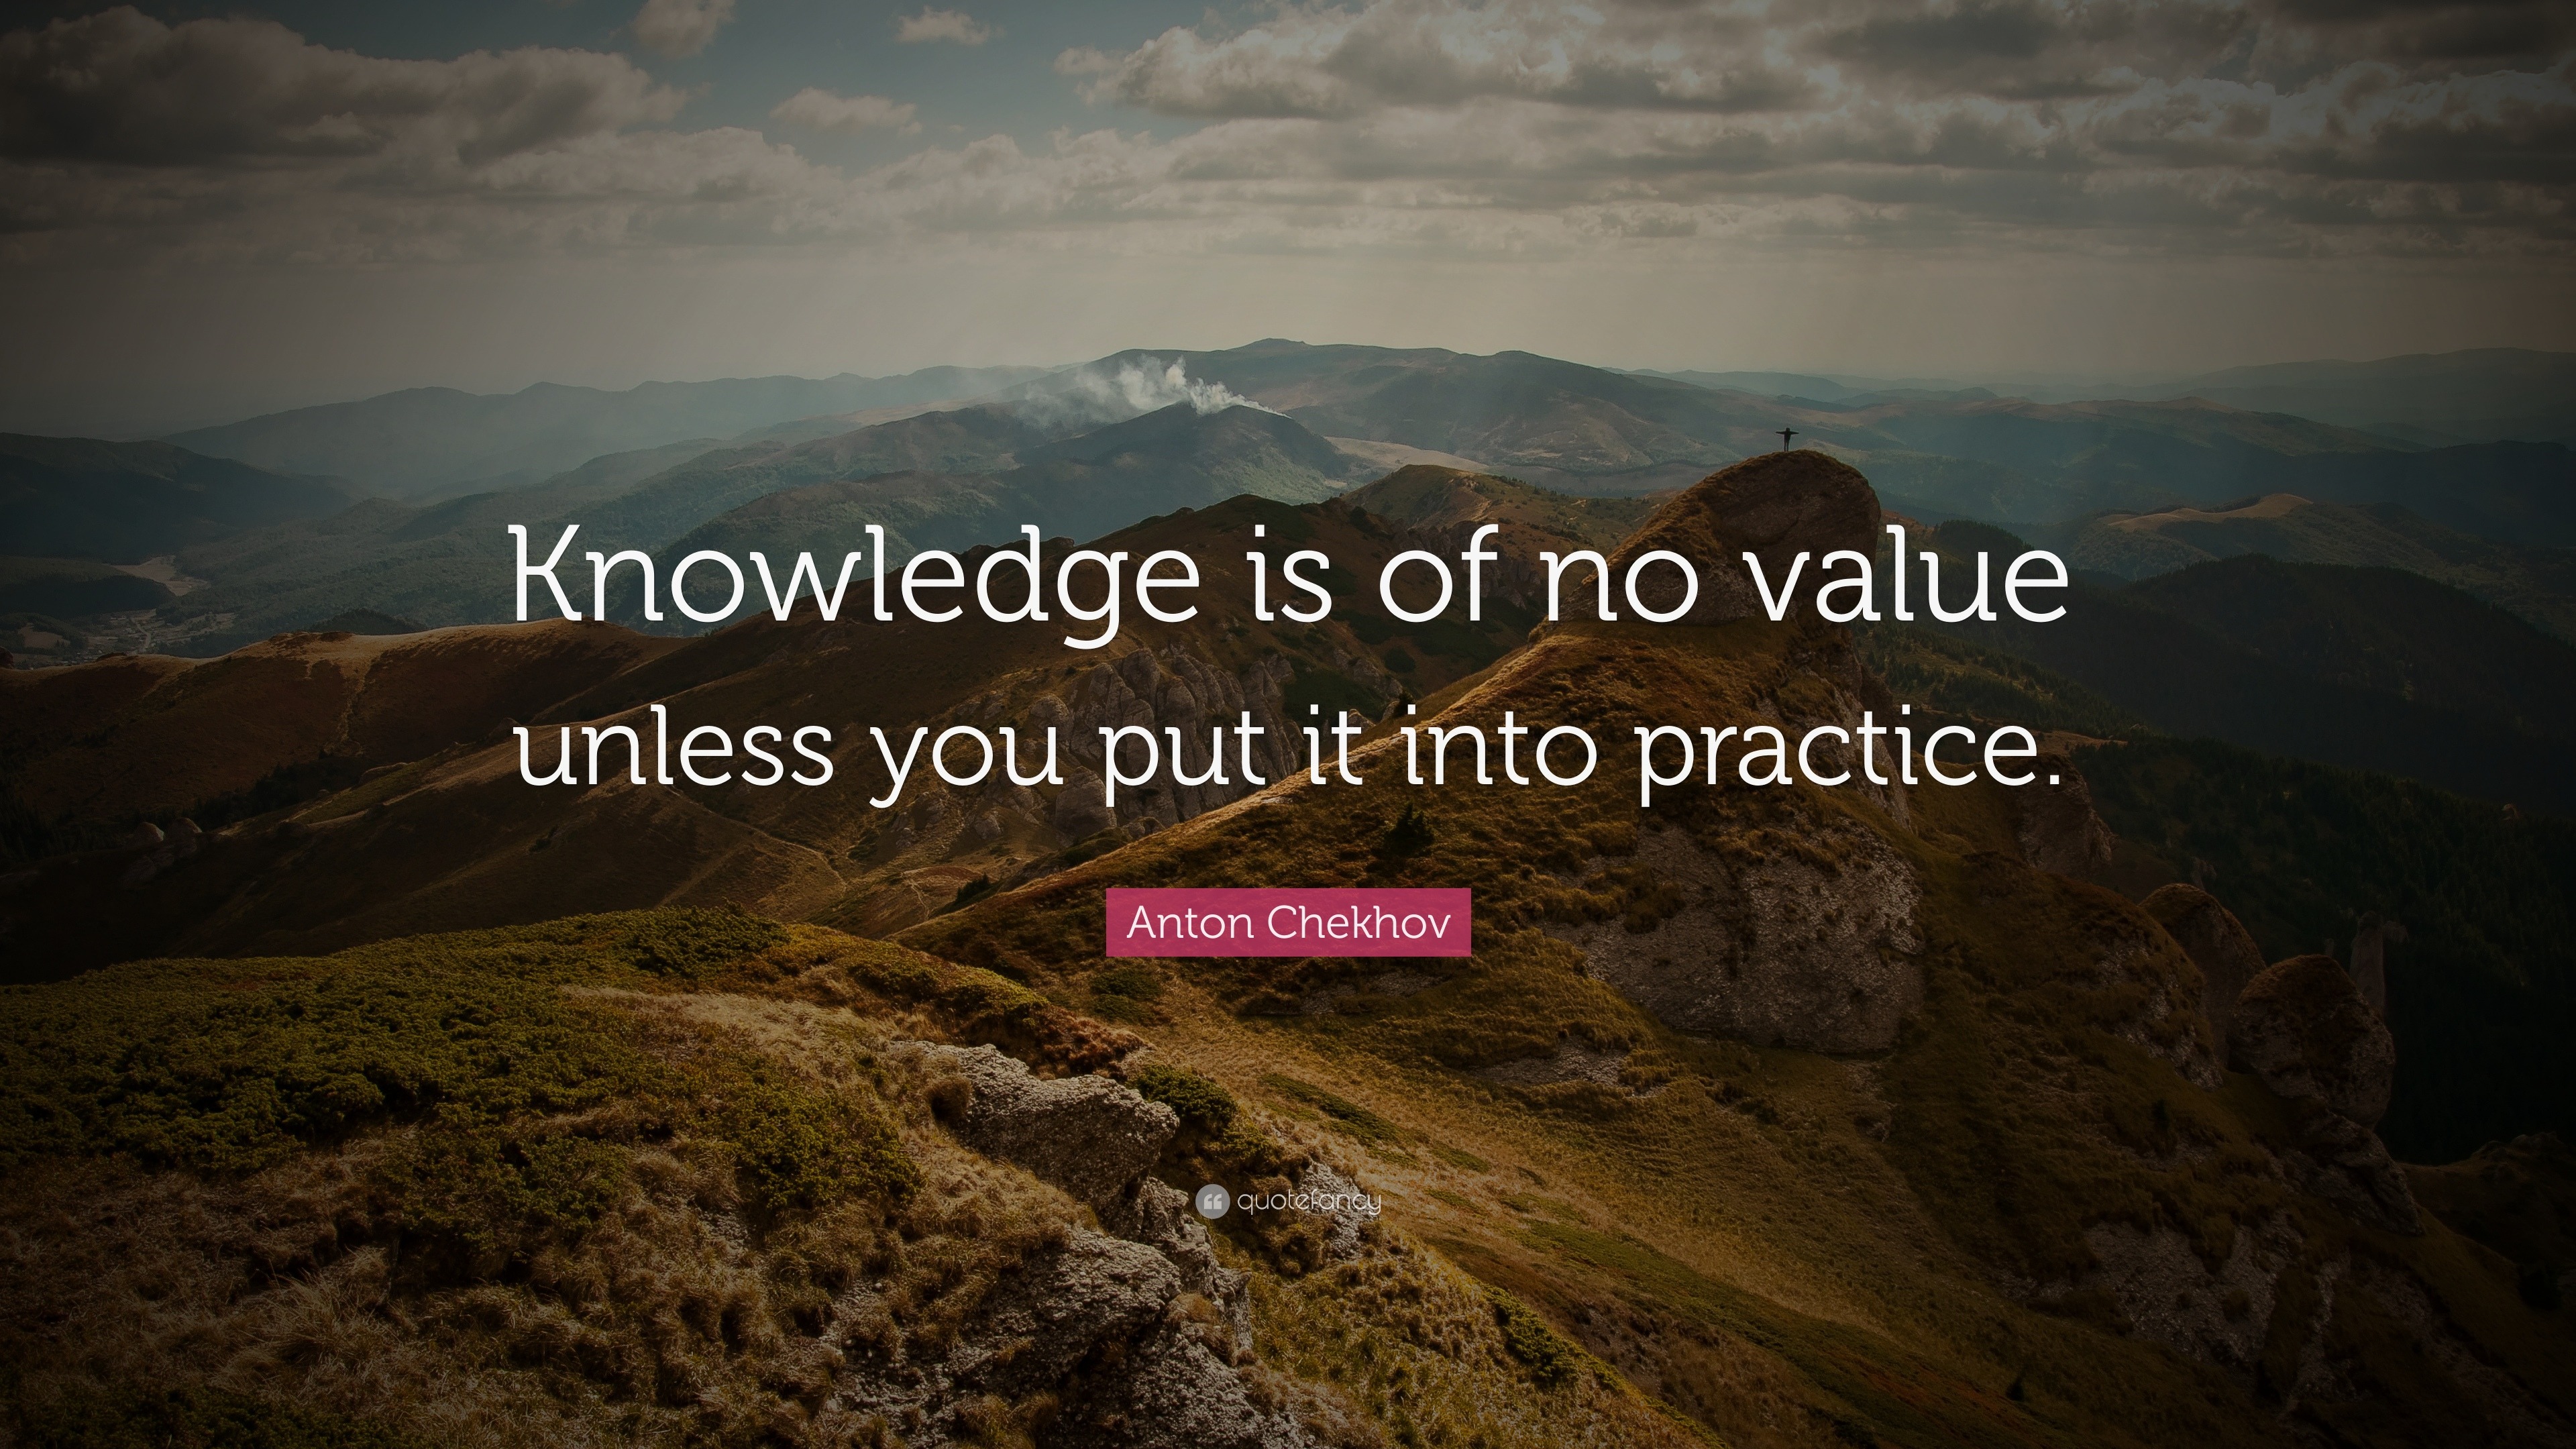 Anton Chekhov Quote: “Knowledge is of no value unless you put it into practice ...